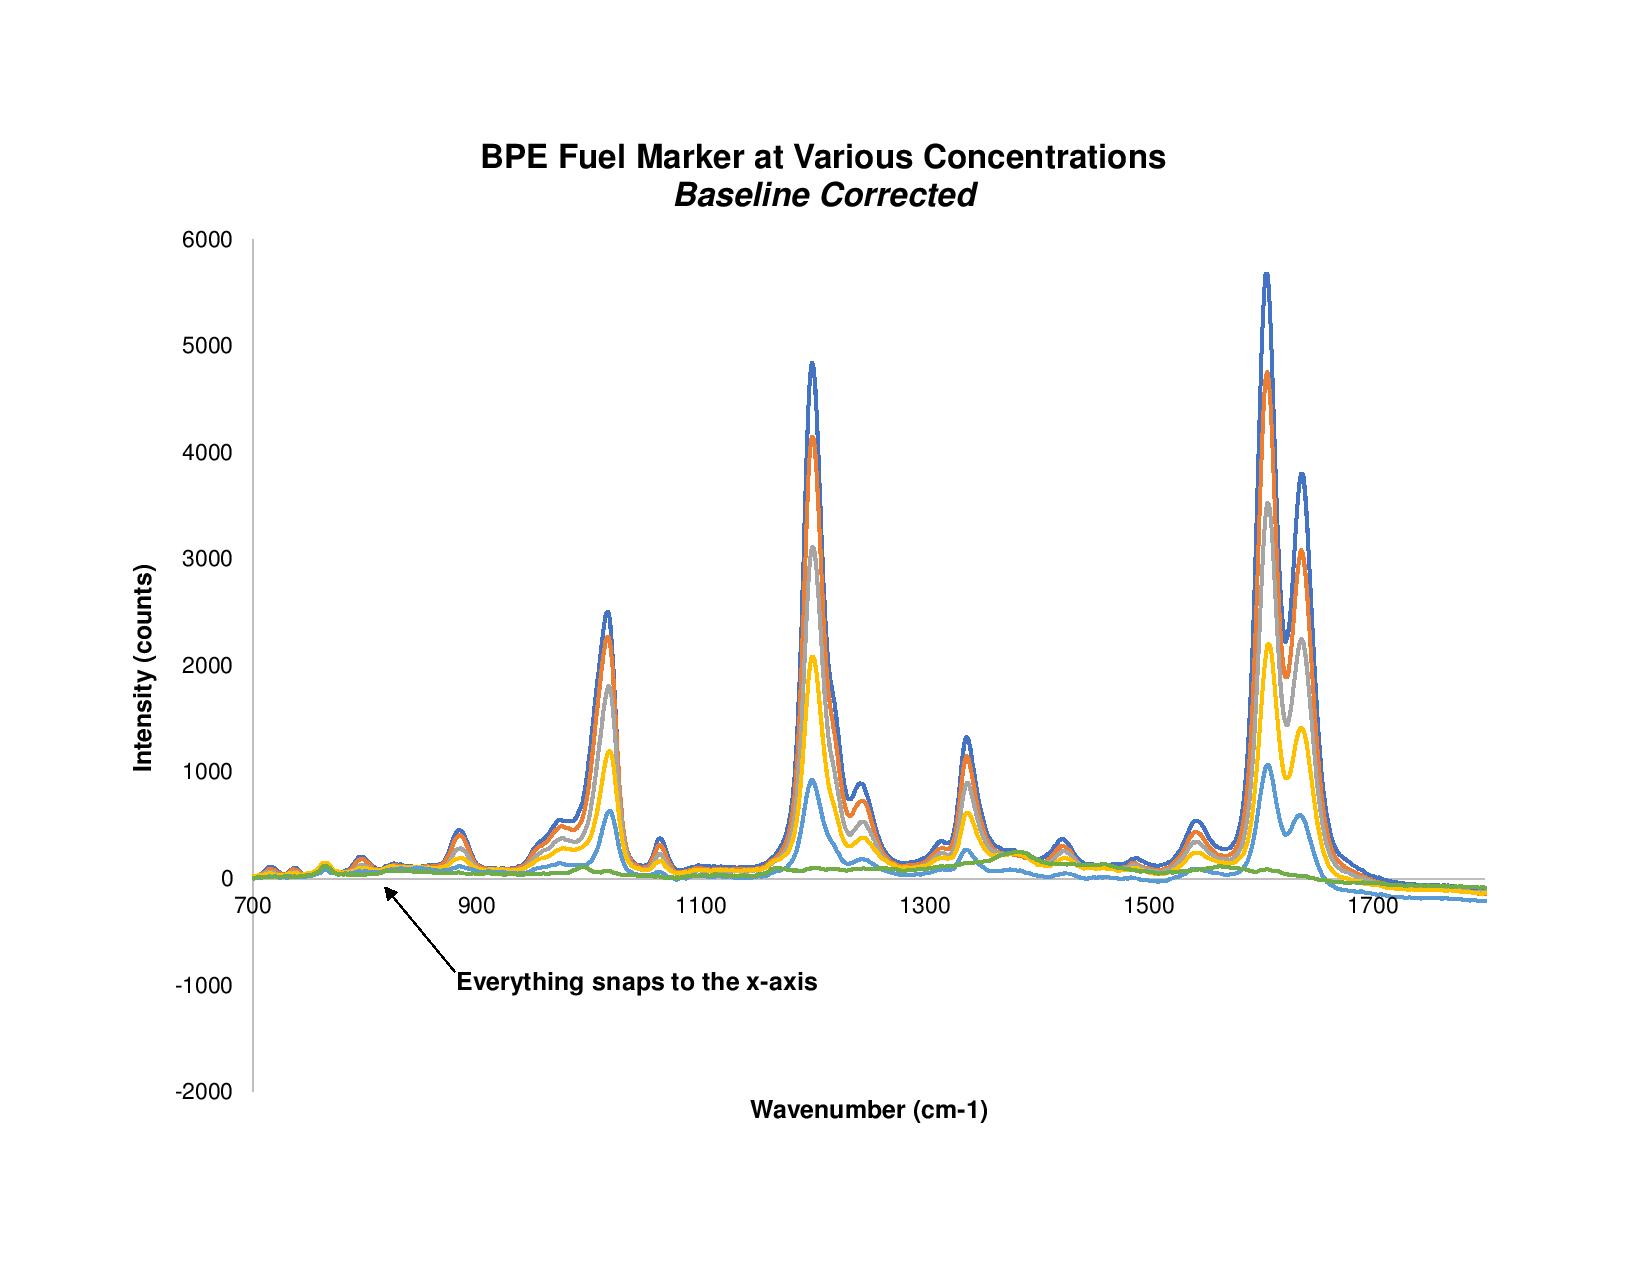 BPE Fuel Marker at Various Concentrations - Raman Data with Baseline Corrected